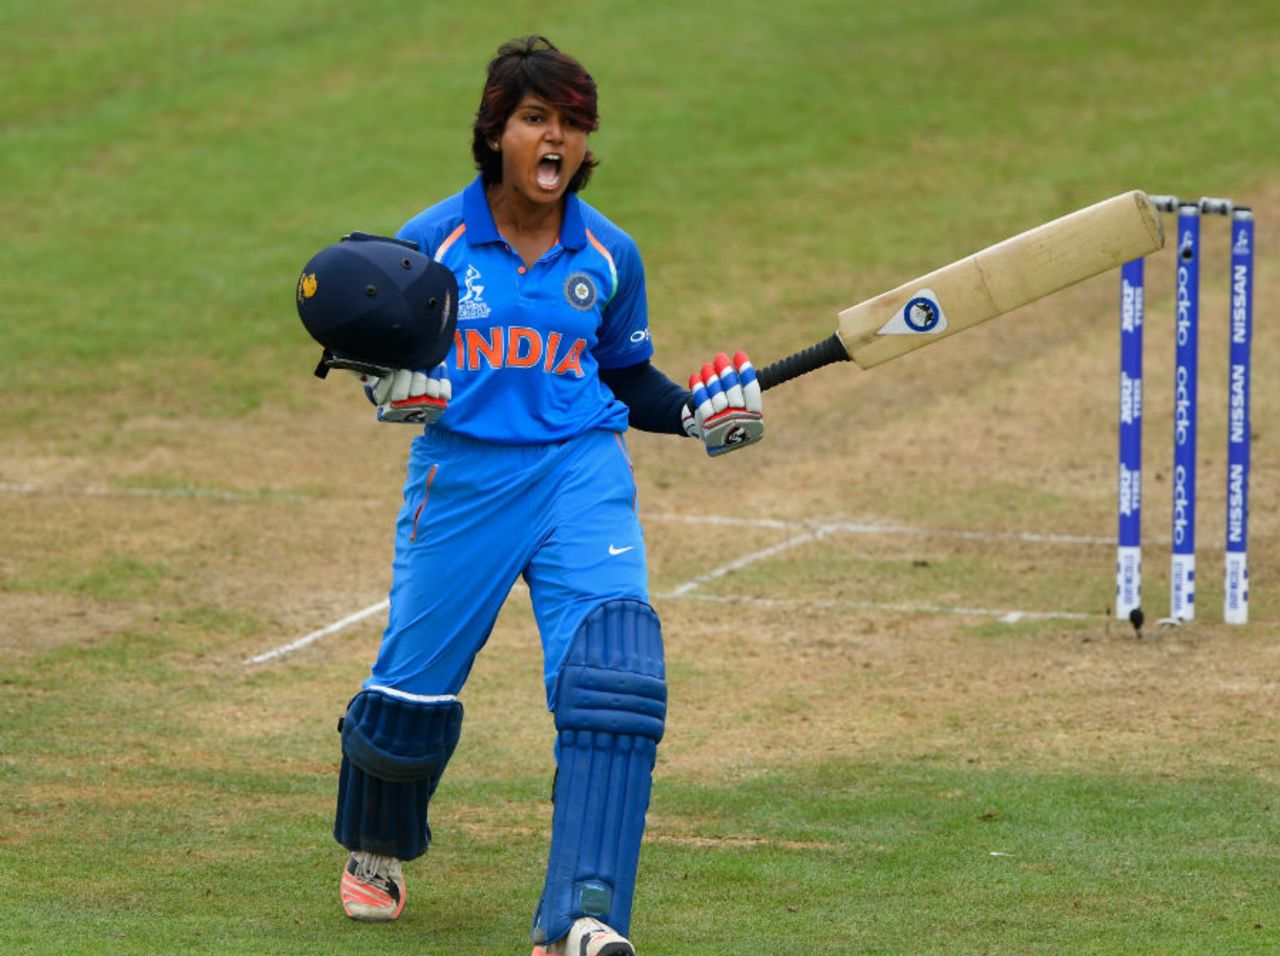 Punam Raut kicked on to bring up her maiden World Cup ton, Australia v India, Women's World Cup, Bristol, July 12, 2017